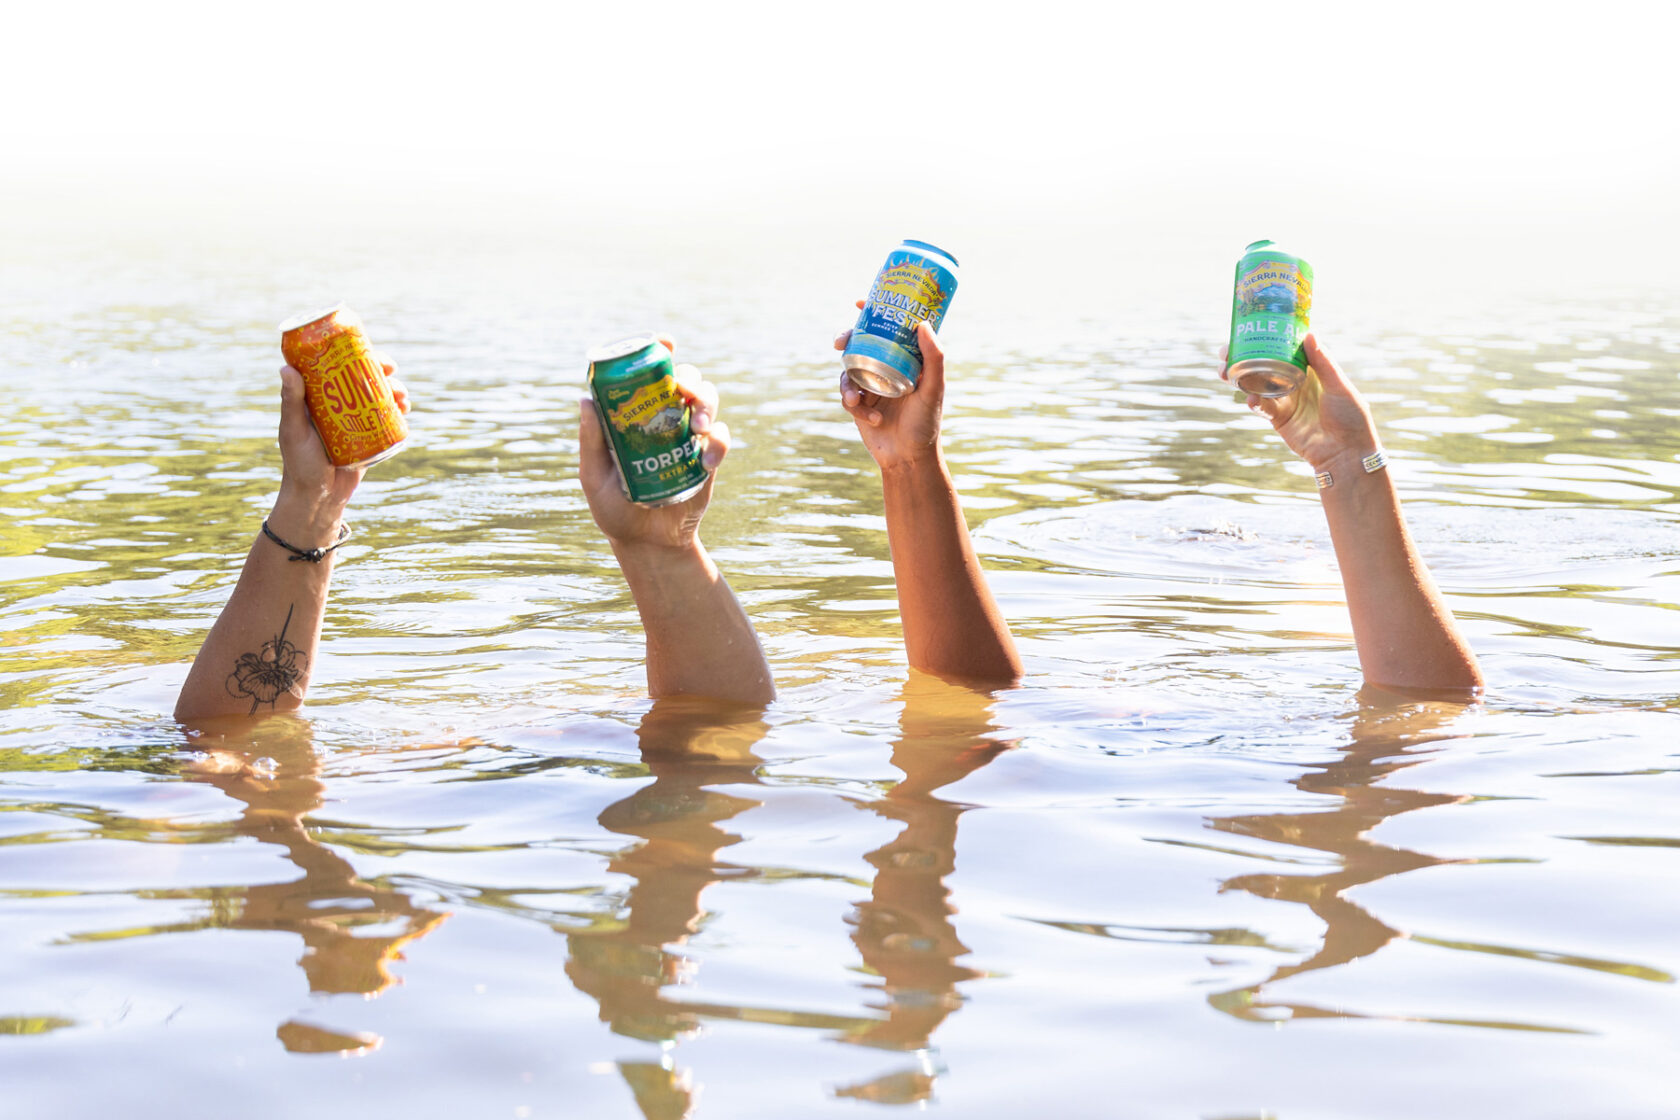 Hands in the river holding up craft beer.